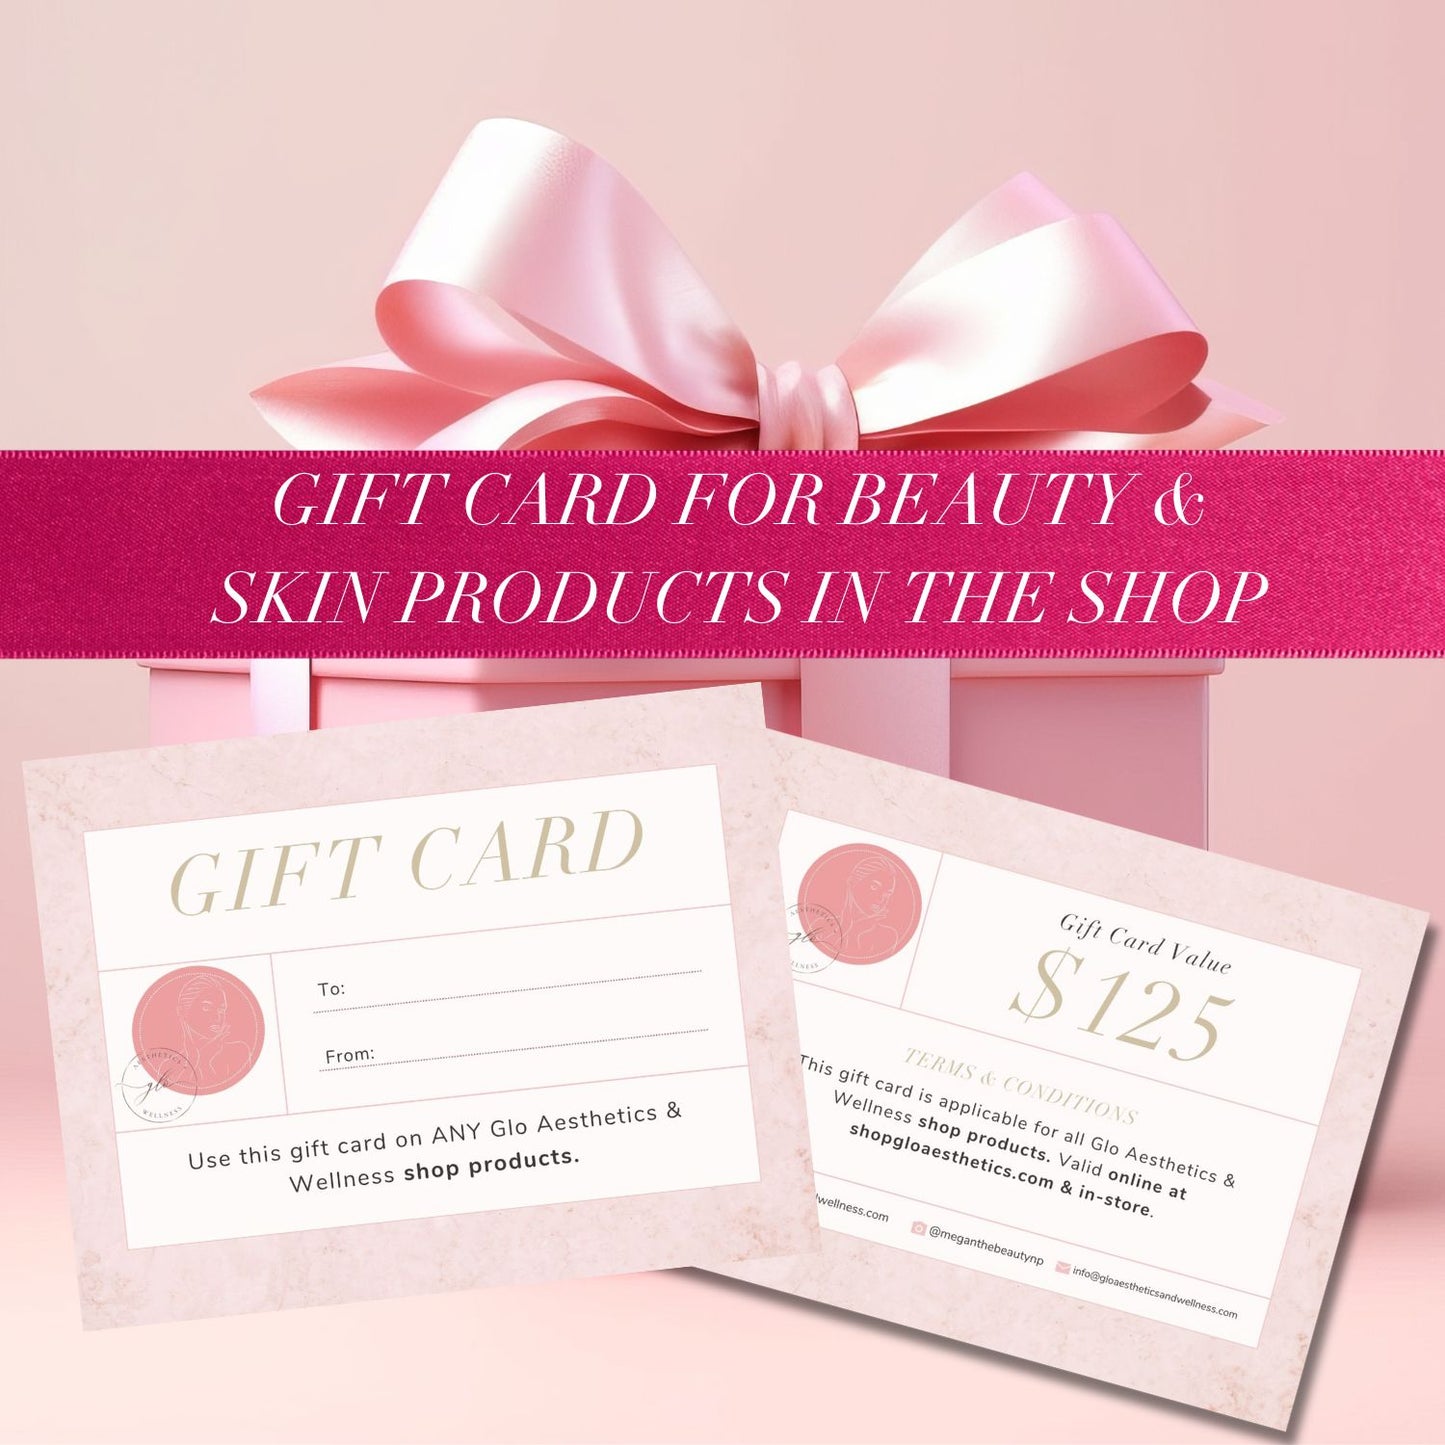 Glo Aesthetics & Wellness Products in Shop Gift Card